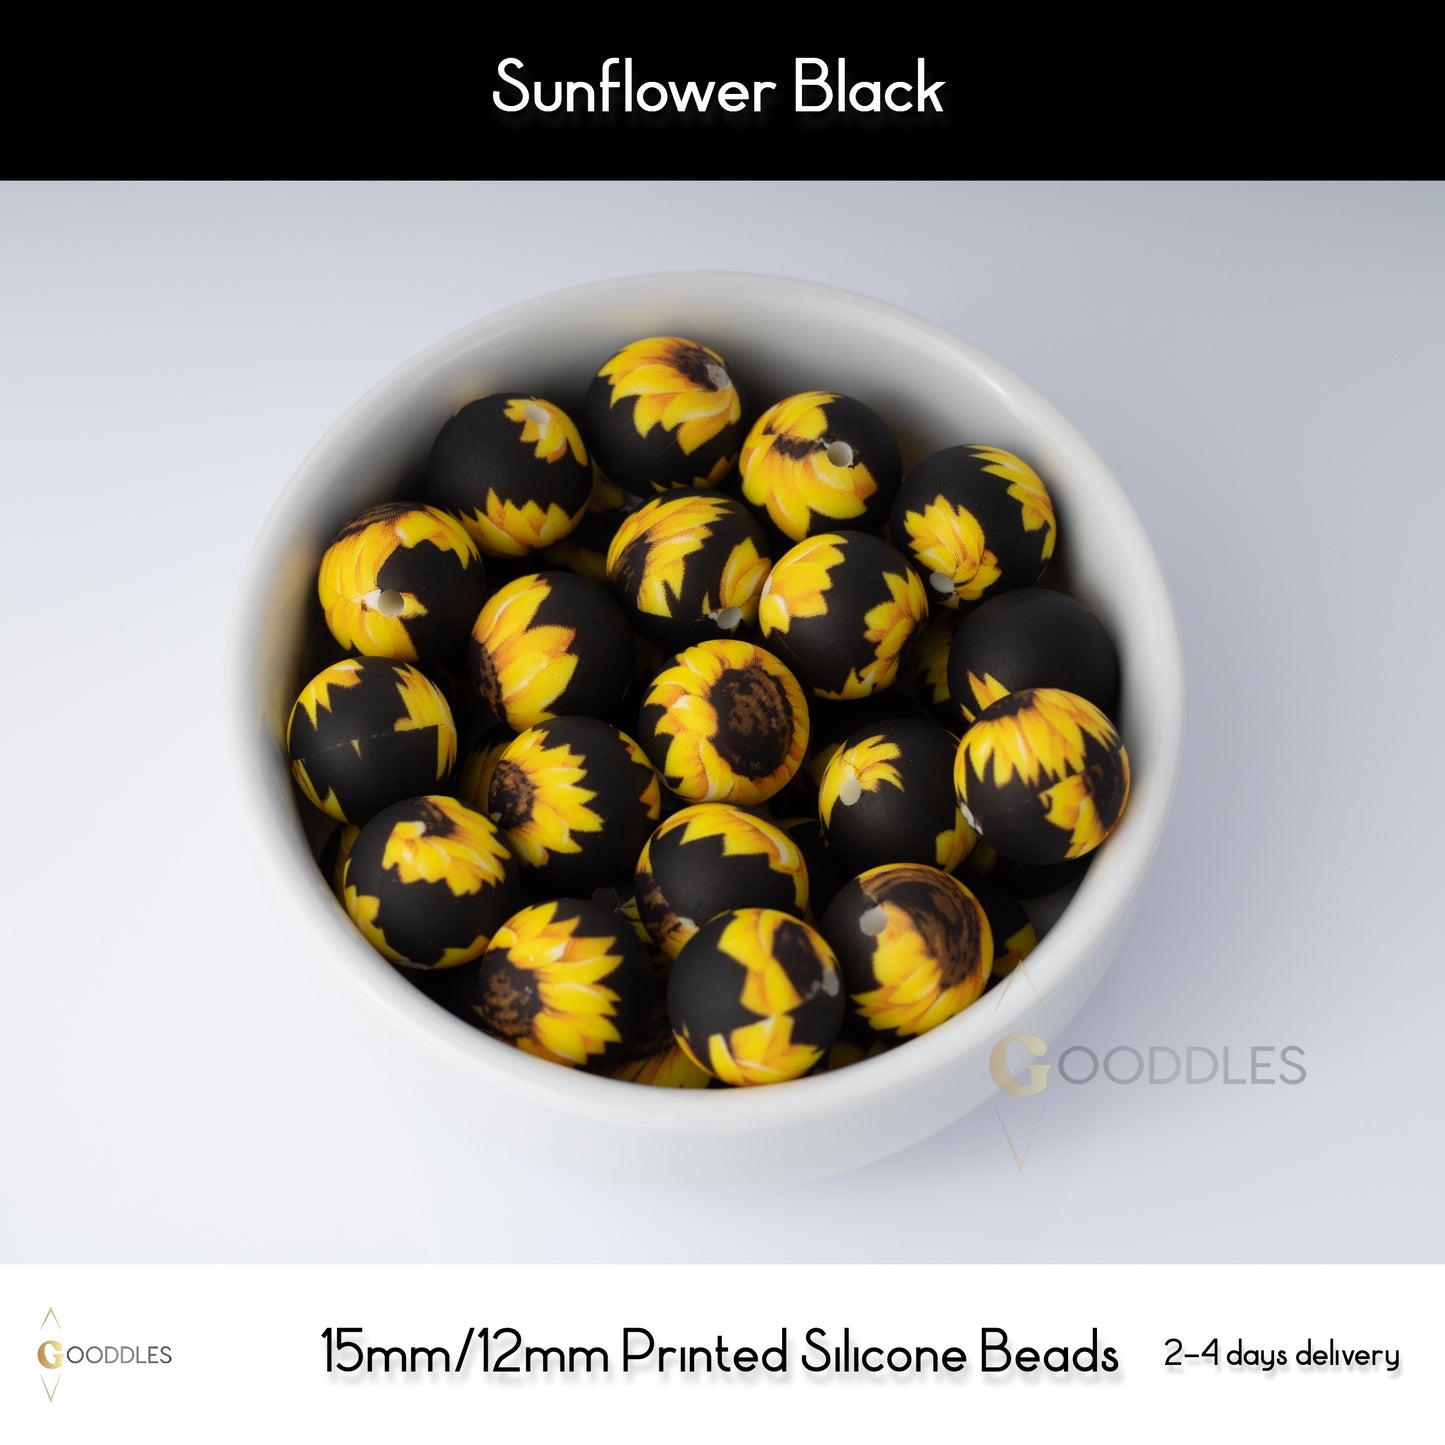 5pcs, Sunflower Black Silicone Beads Printed Round Silicone Beads